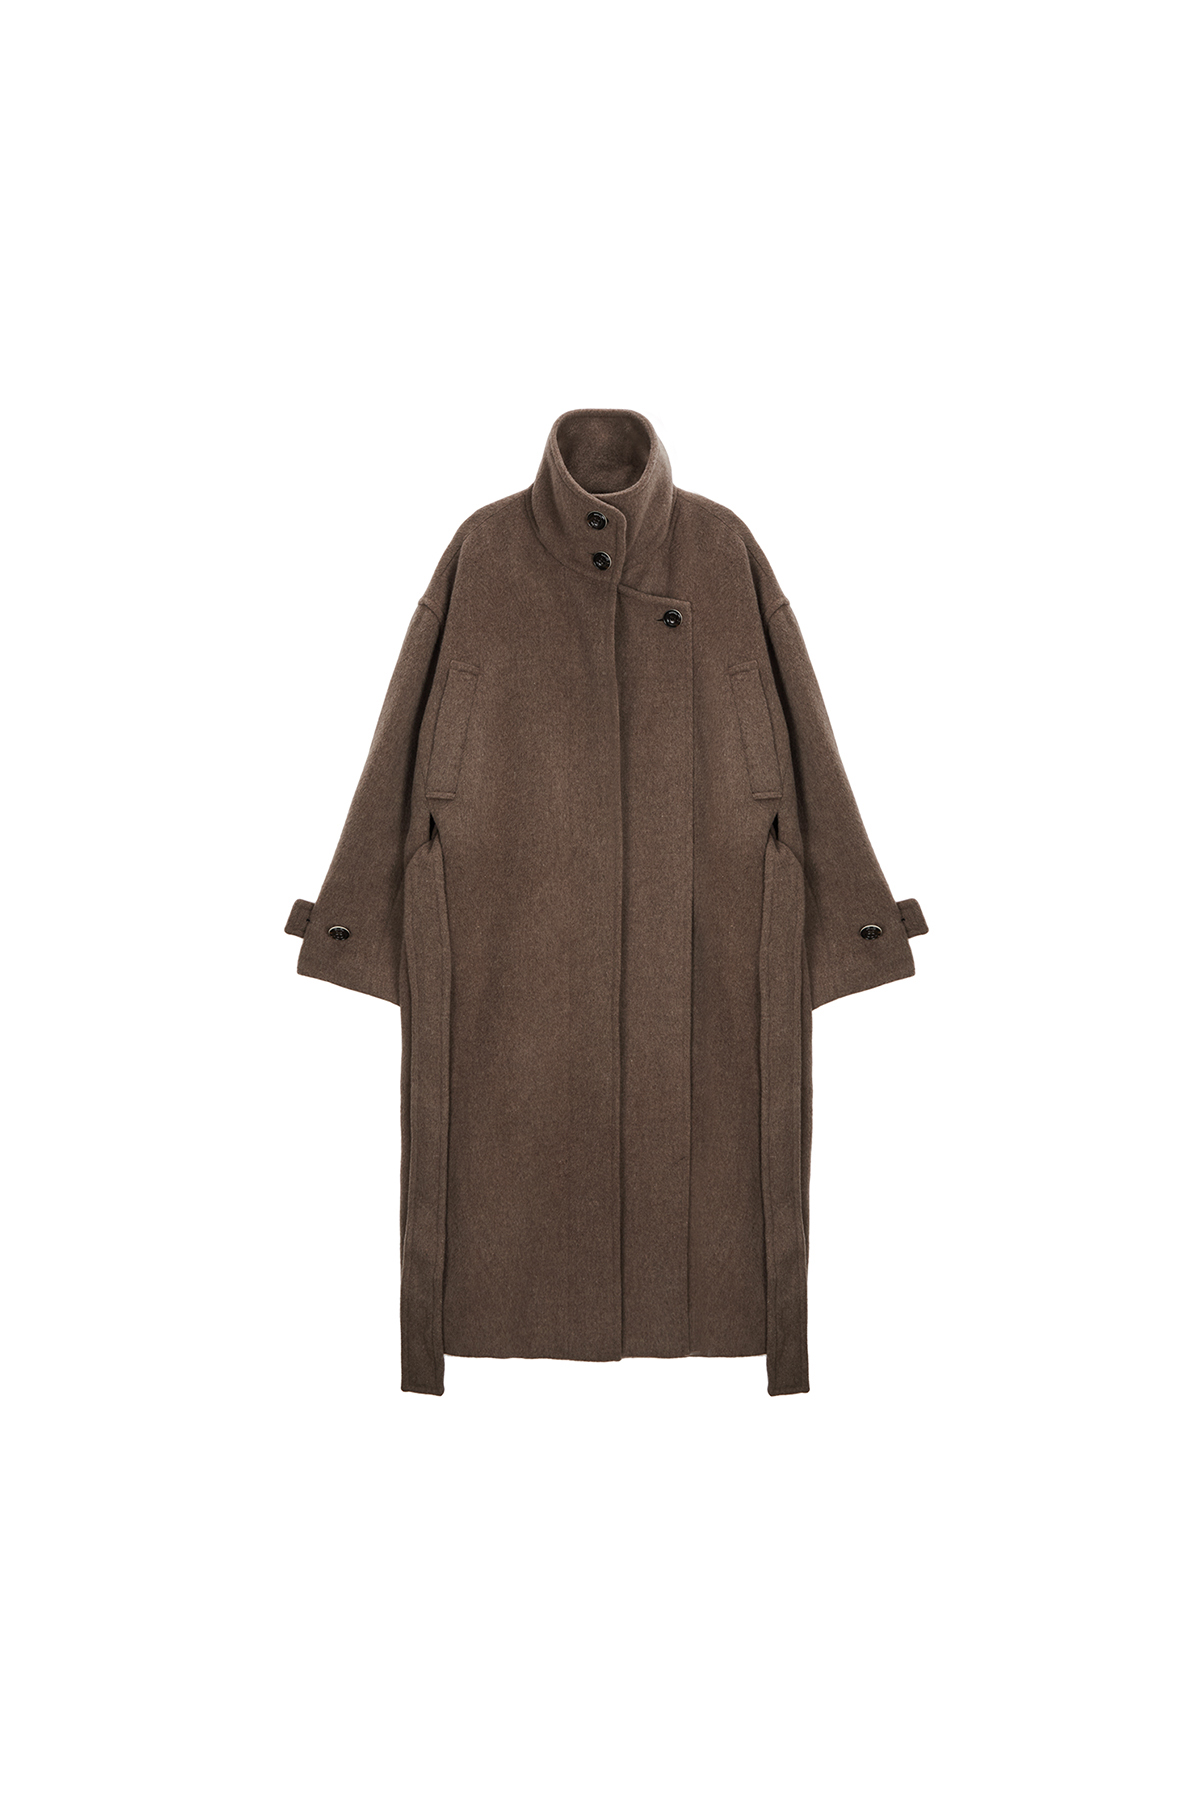 HIGH NECK FLARE COAT IN BROWN